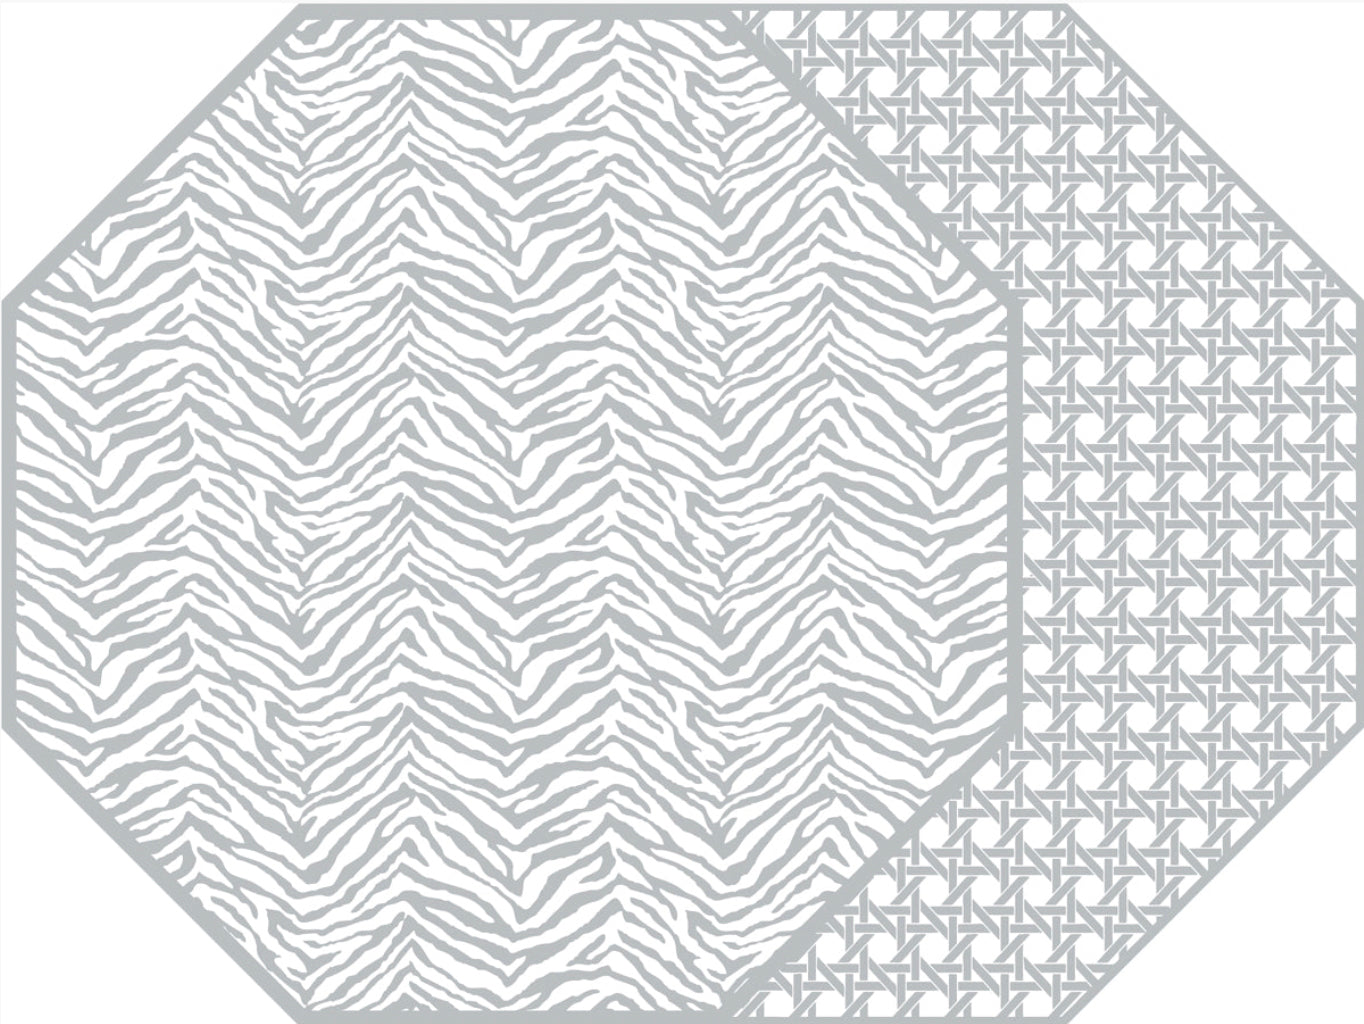 OCTAGONAL TWO SIDED ZEBRA PLACEMAT WITH CANE ~ GRAY